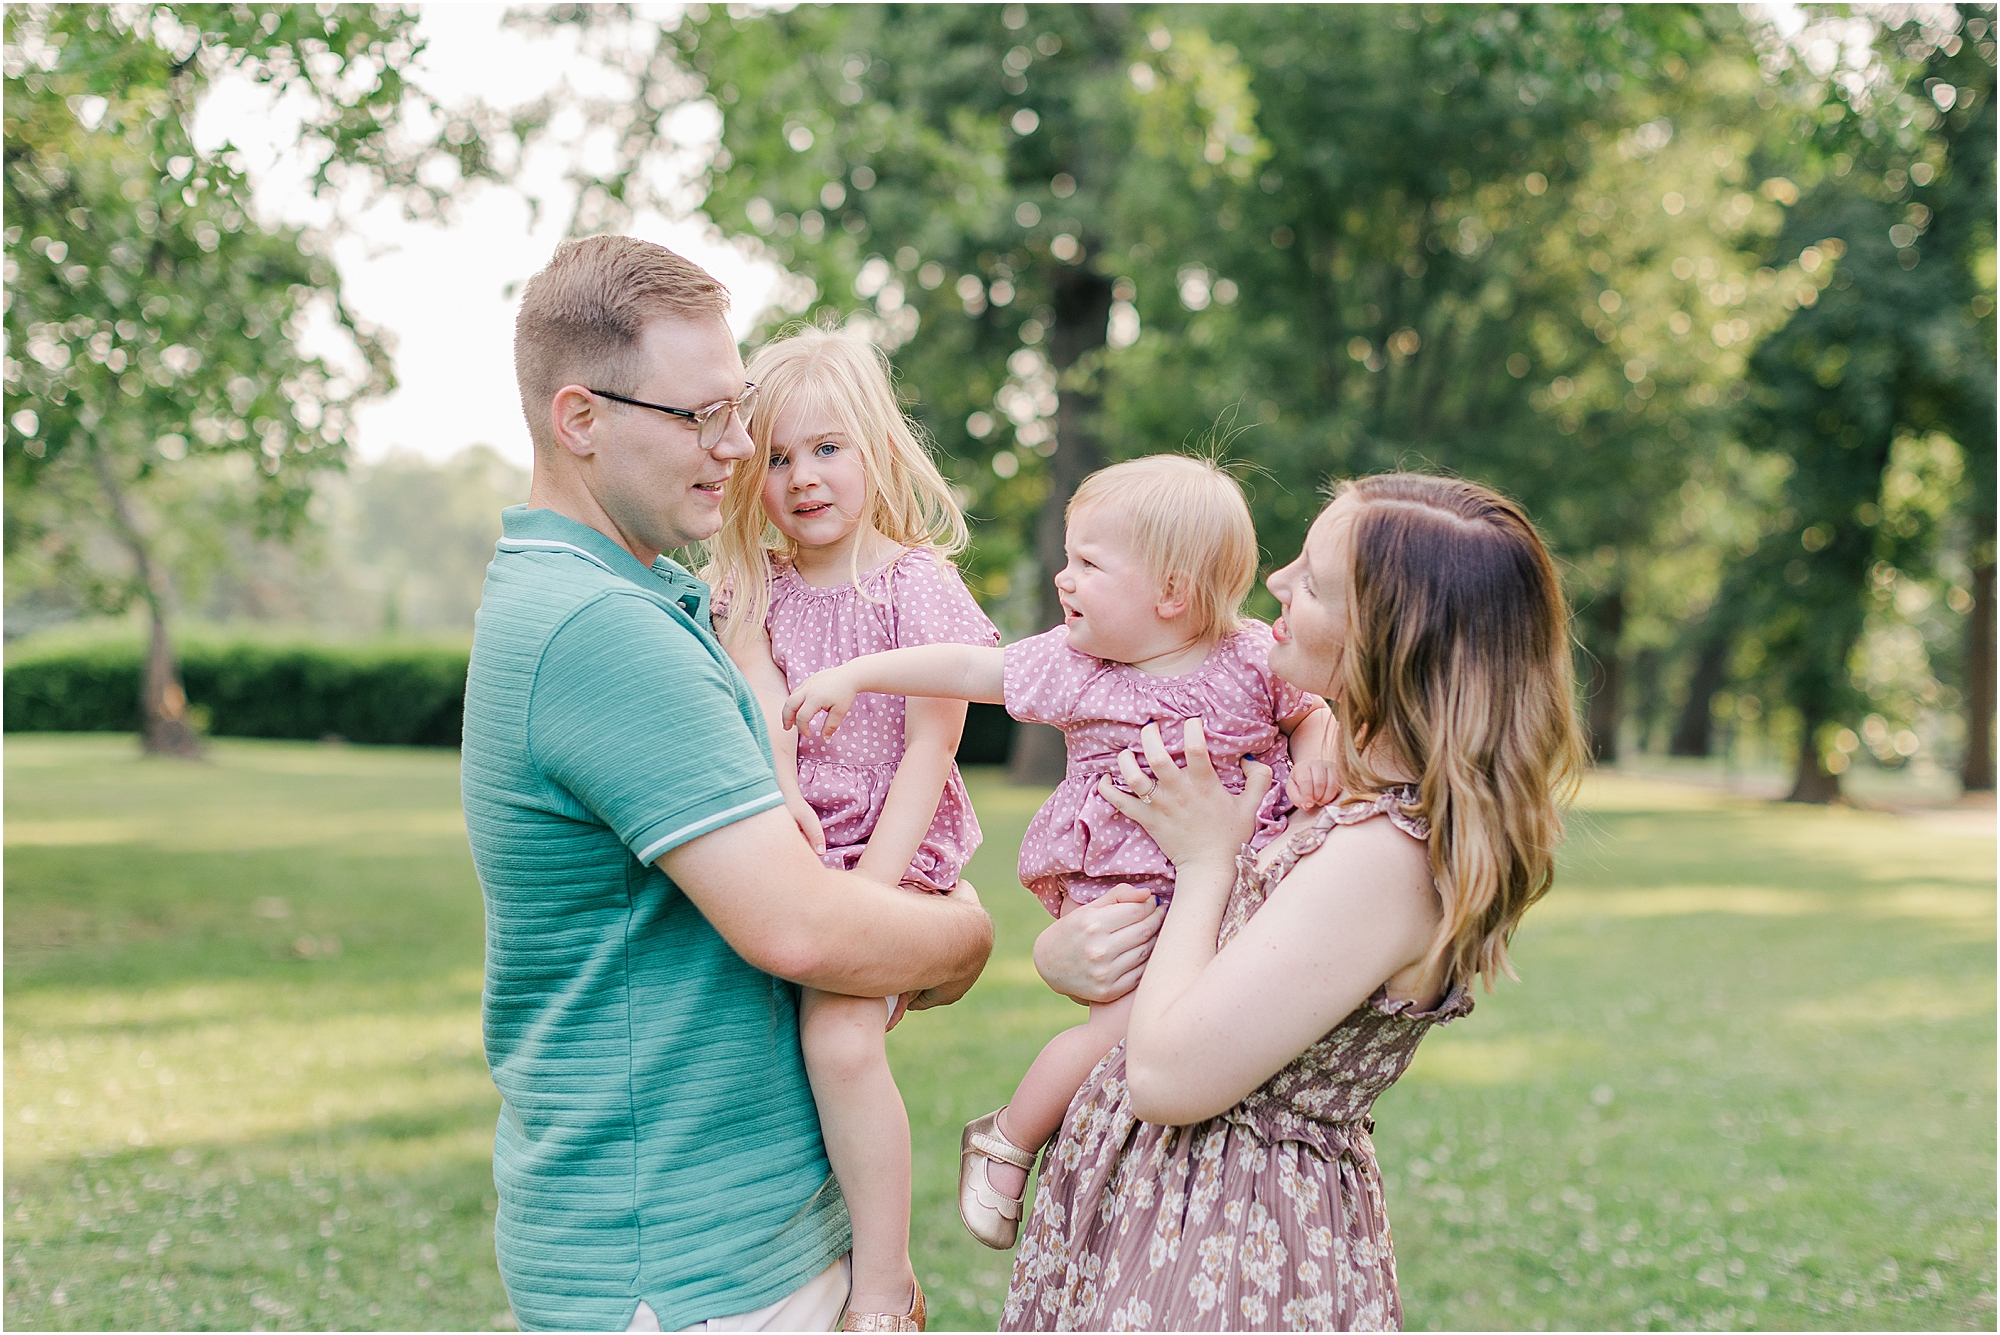 A family of four in the park at their summer family photo session.